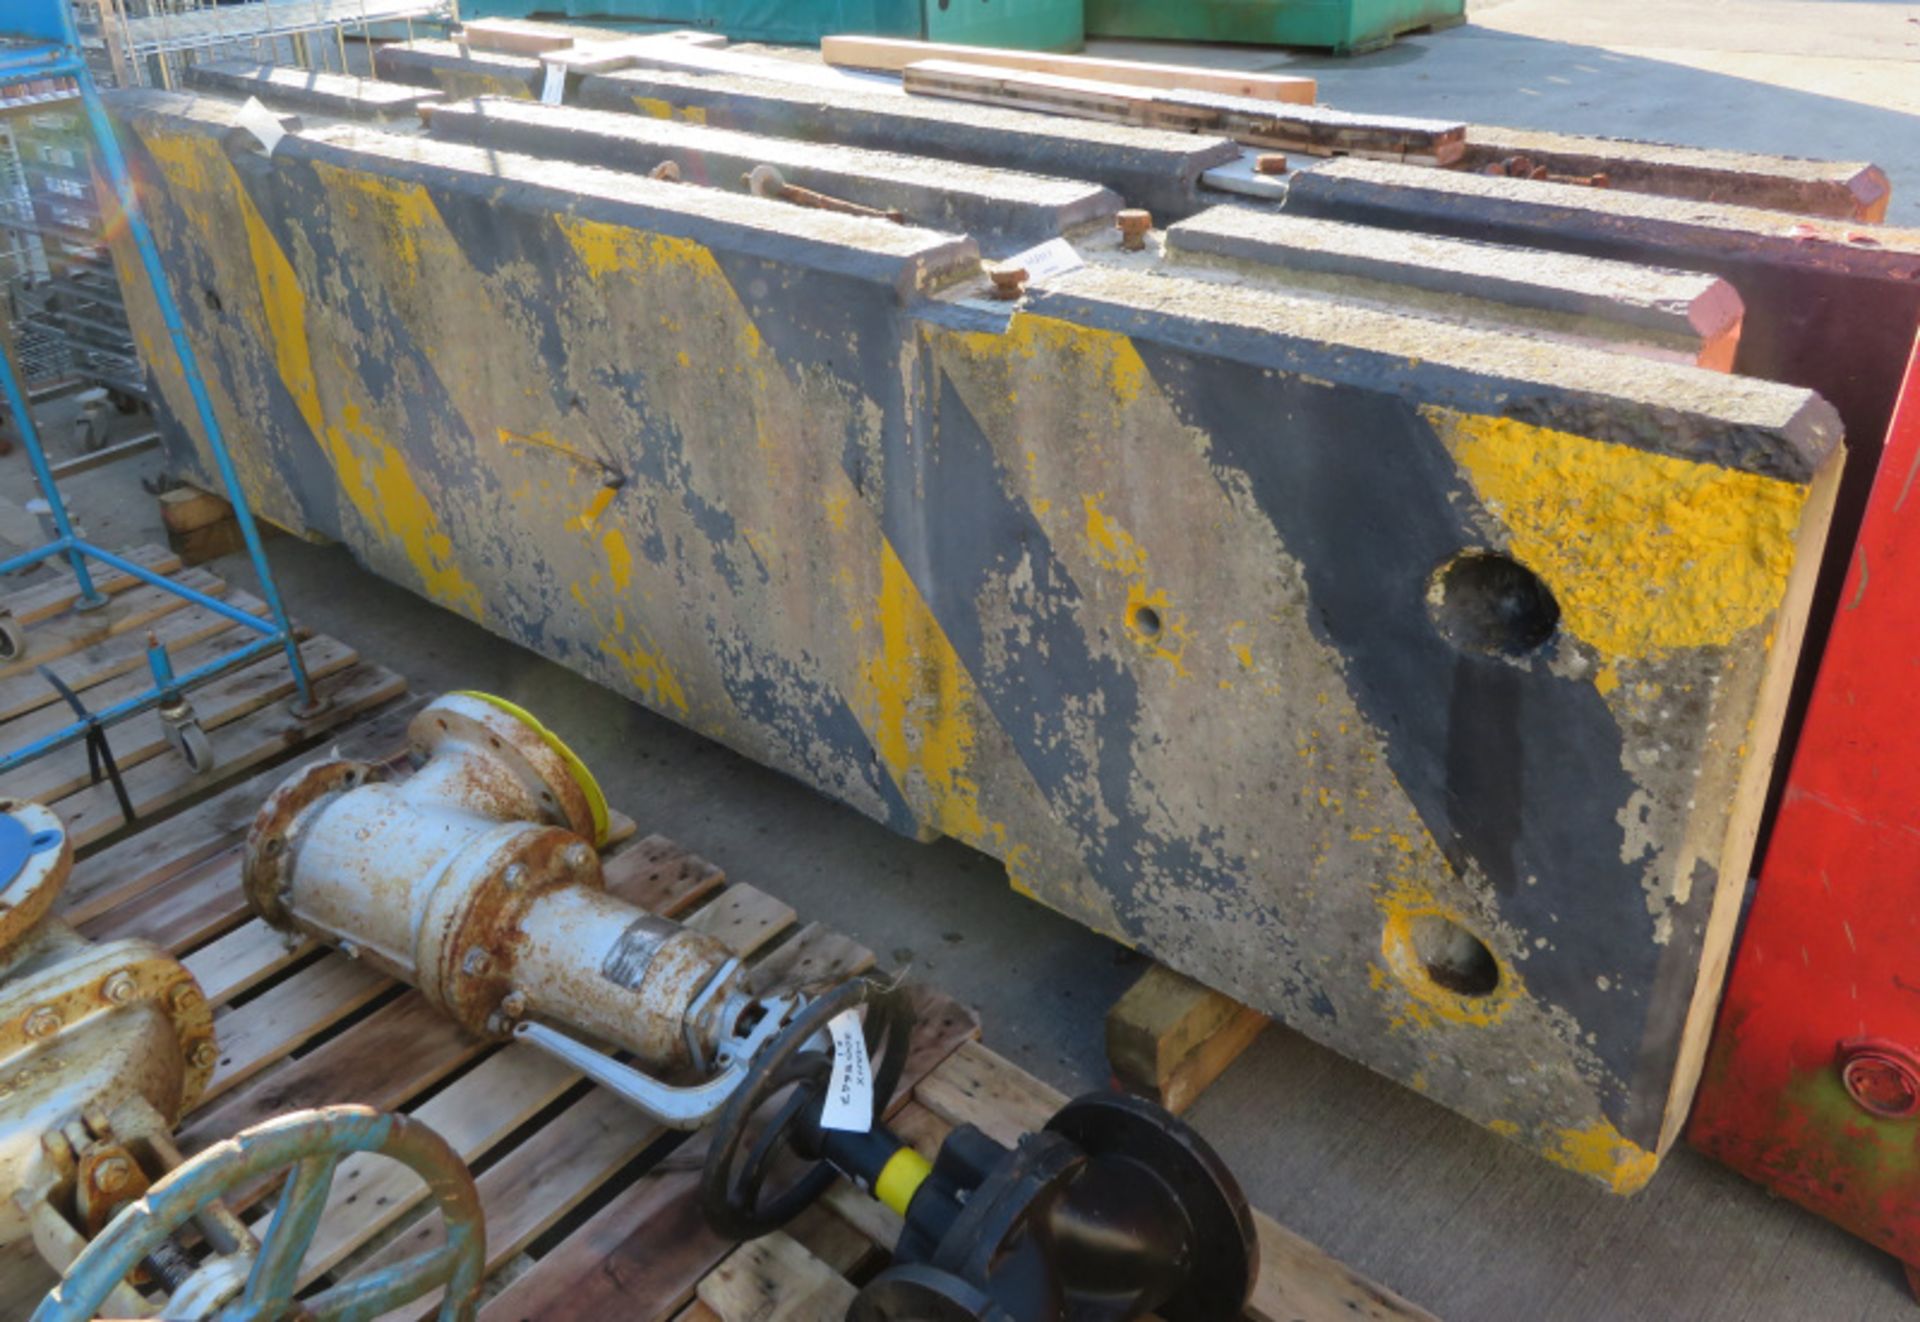 TVCB Concrete barrier - 3000mm x 450mm x 800mm - weight 2500kg